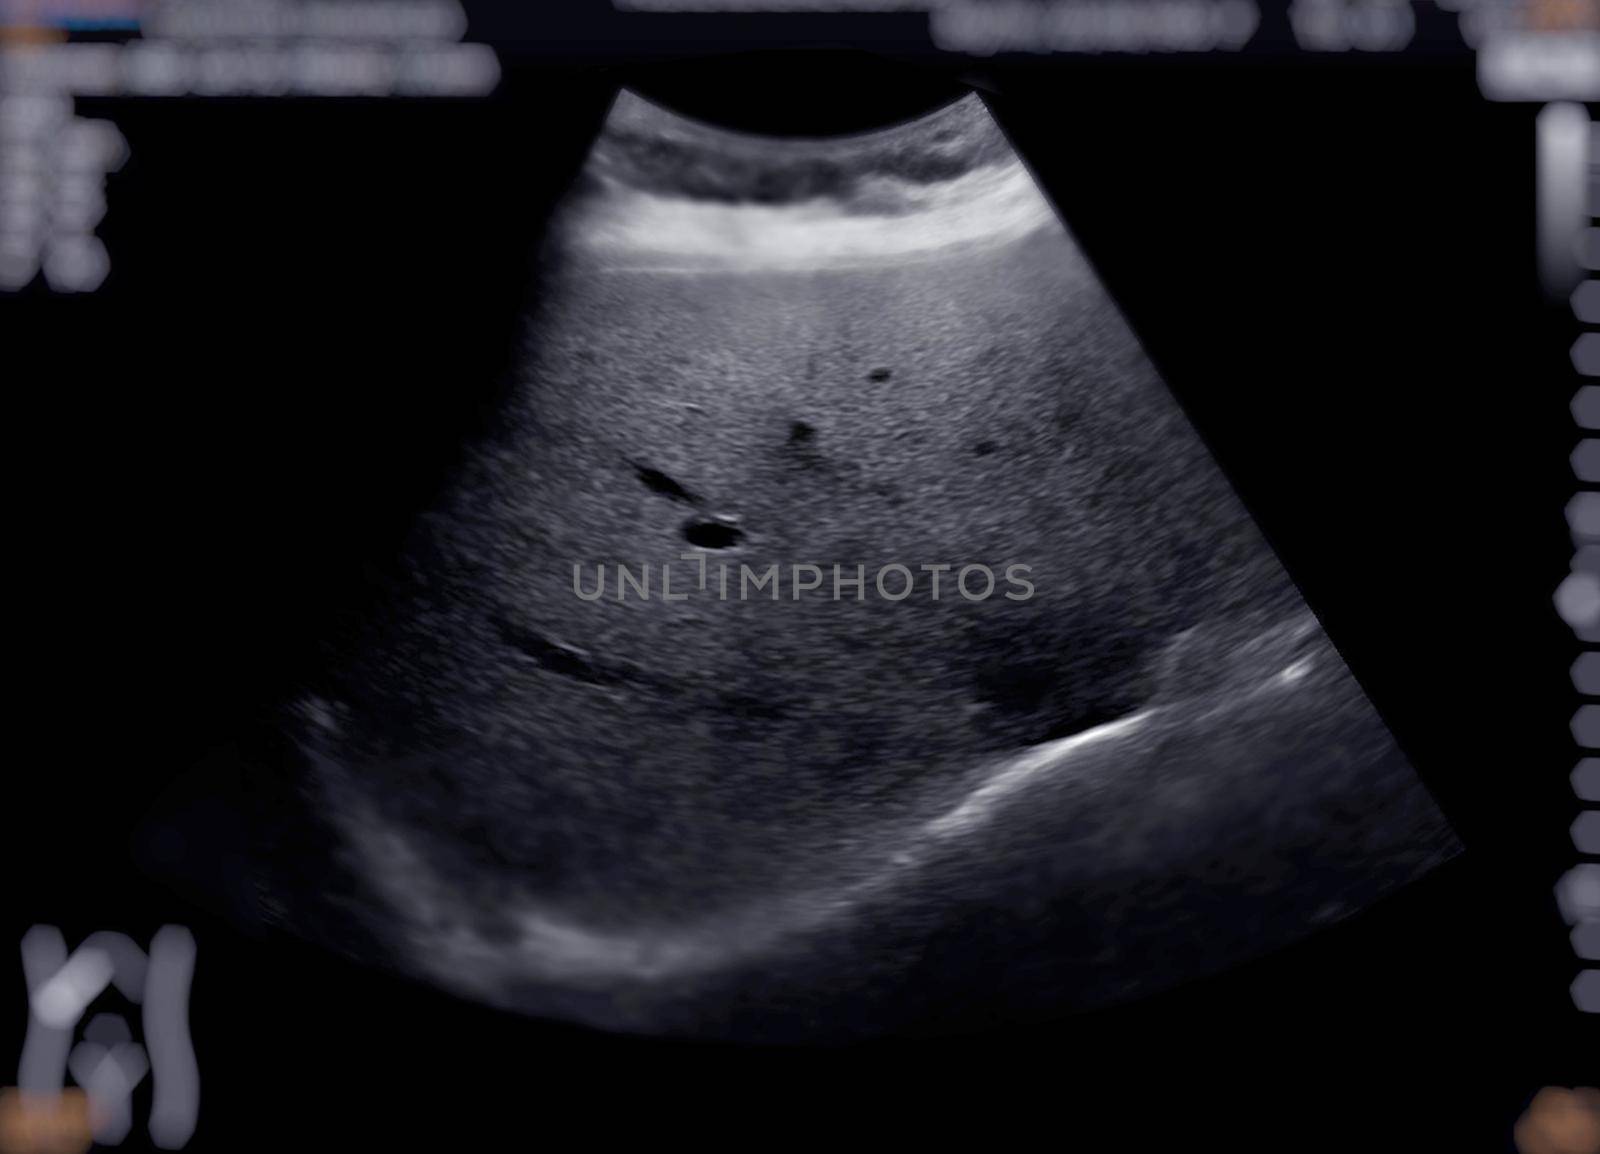 Ultrasound upper abdomen showing Liver and gall bladder for screening hepatic cell carcinoma and gallstone.